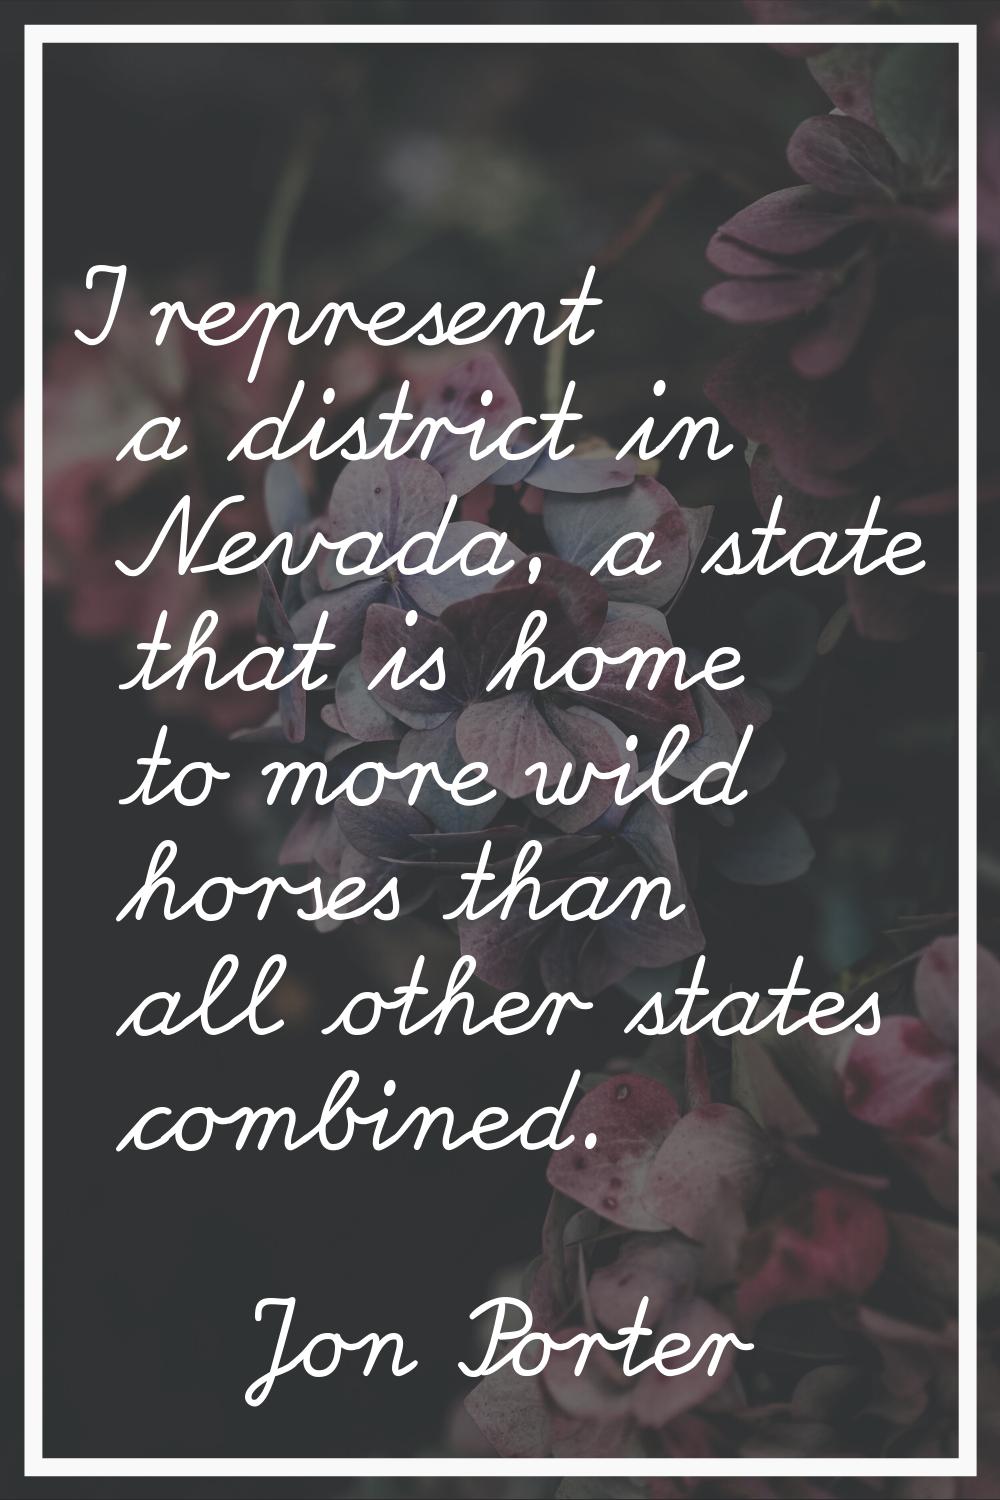 I represent a district in Nevada, a state that is home to more wild horses than all other states co